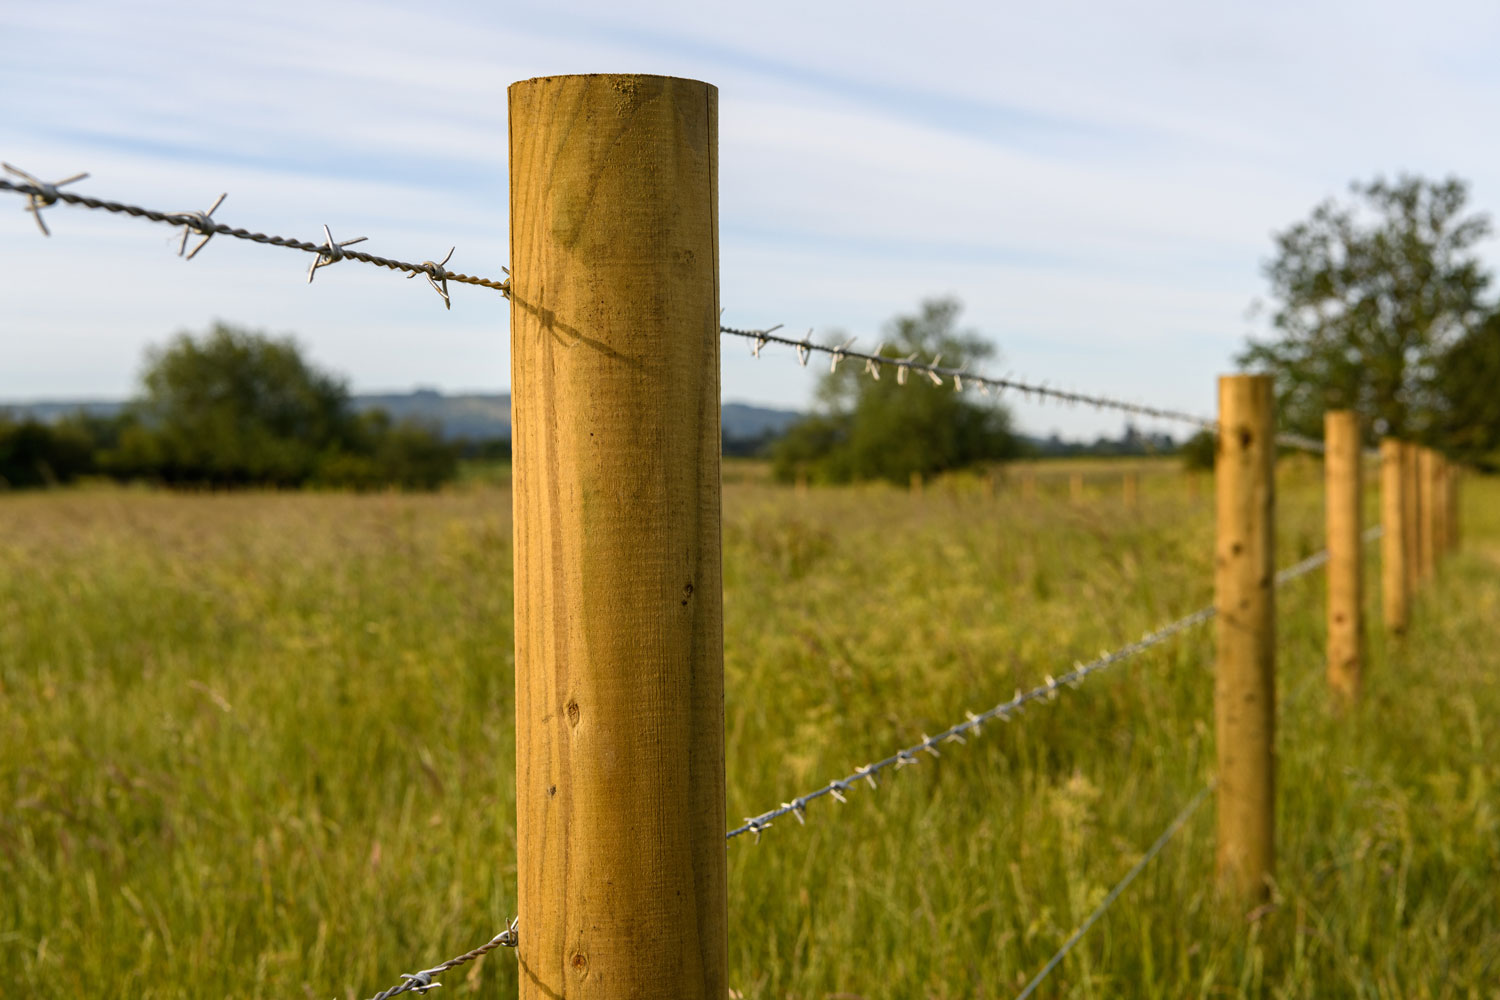 Barb wire fence posts for a ranch